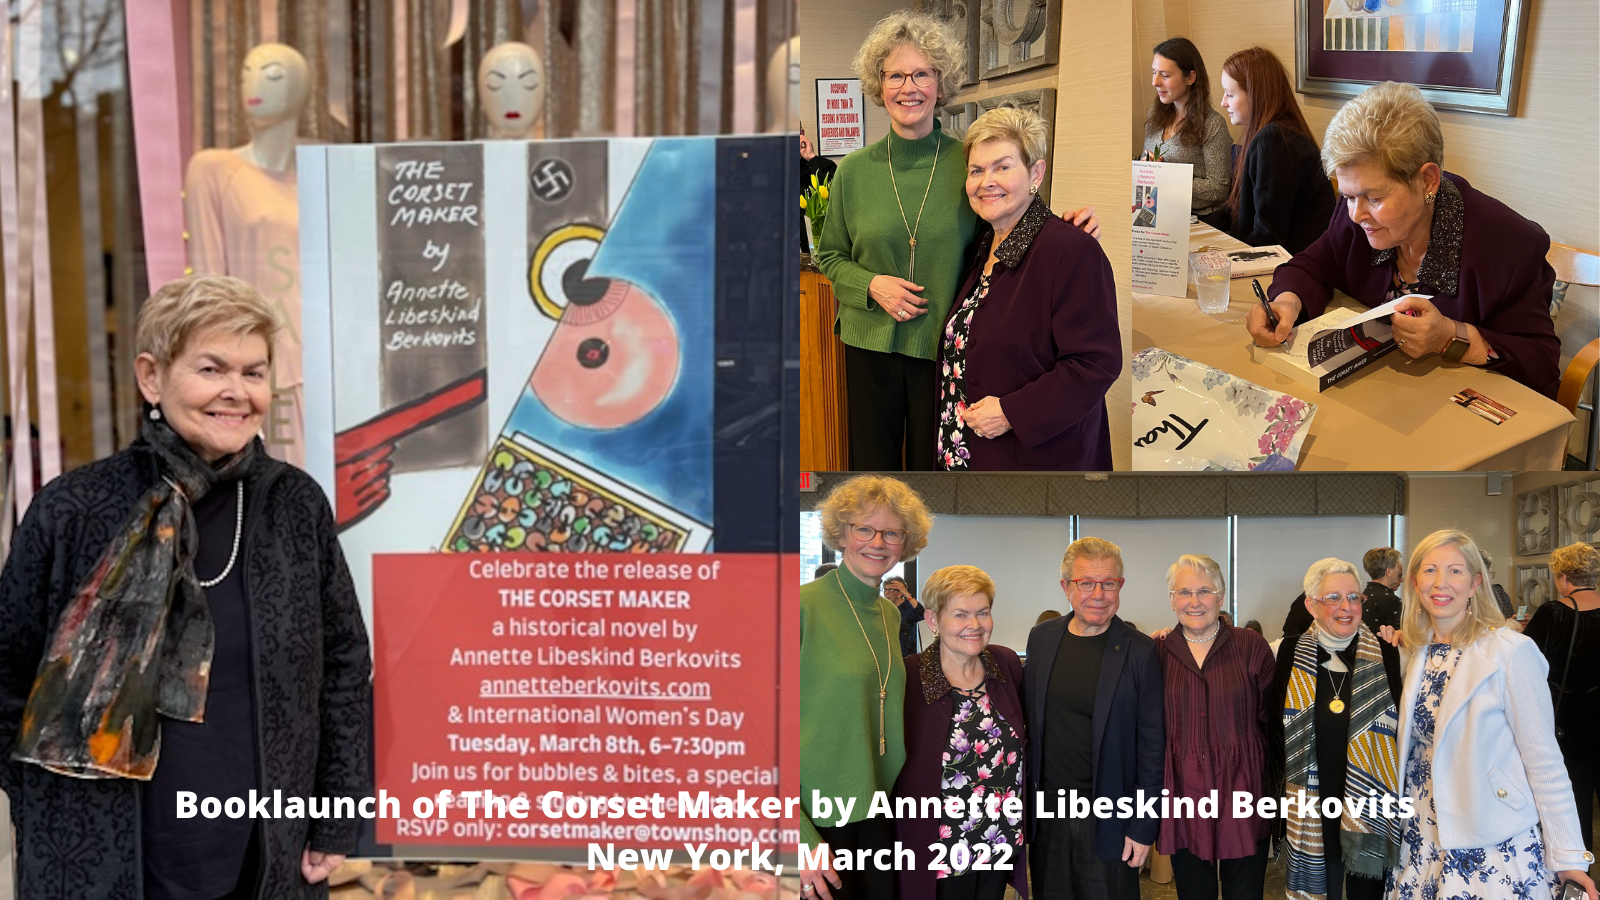 https://amsterdampublishers.com/wp-content/uploads/2022/03/Booklaunch-of-The-Corset-Maker-by-Annette-Libeskind-Berkovits-New-York-March-2022.png